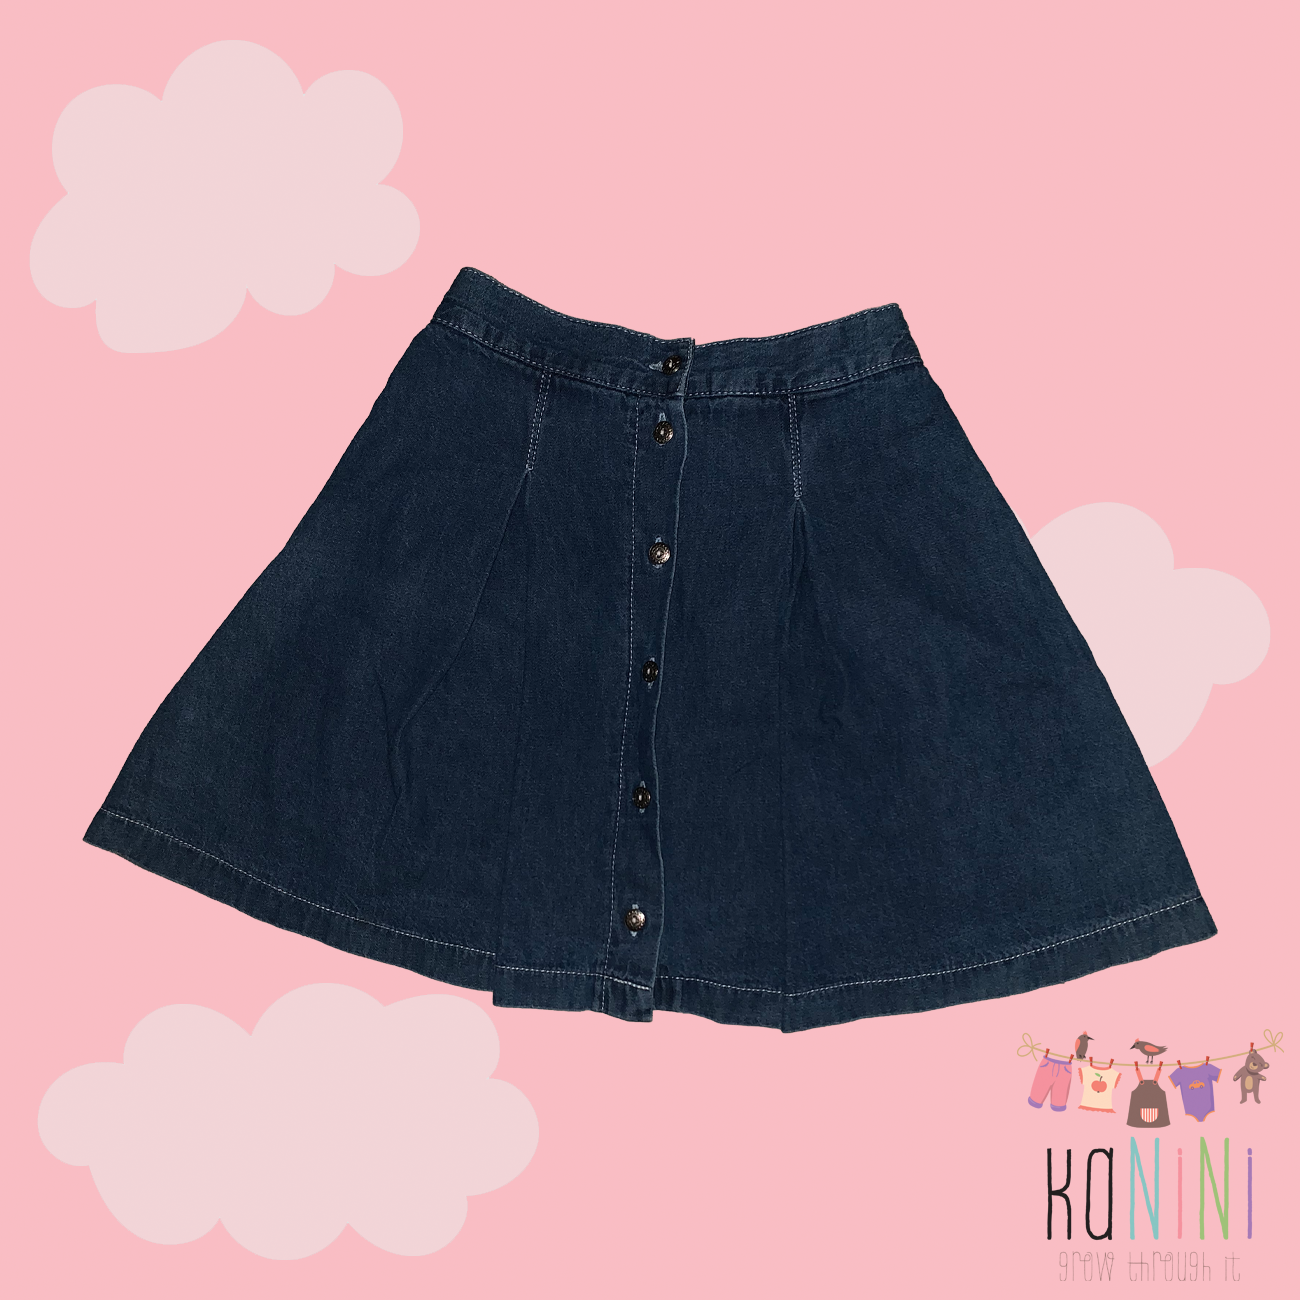 Featured image for “Around About 8 - 9 Years Girls Denim Skirt”